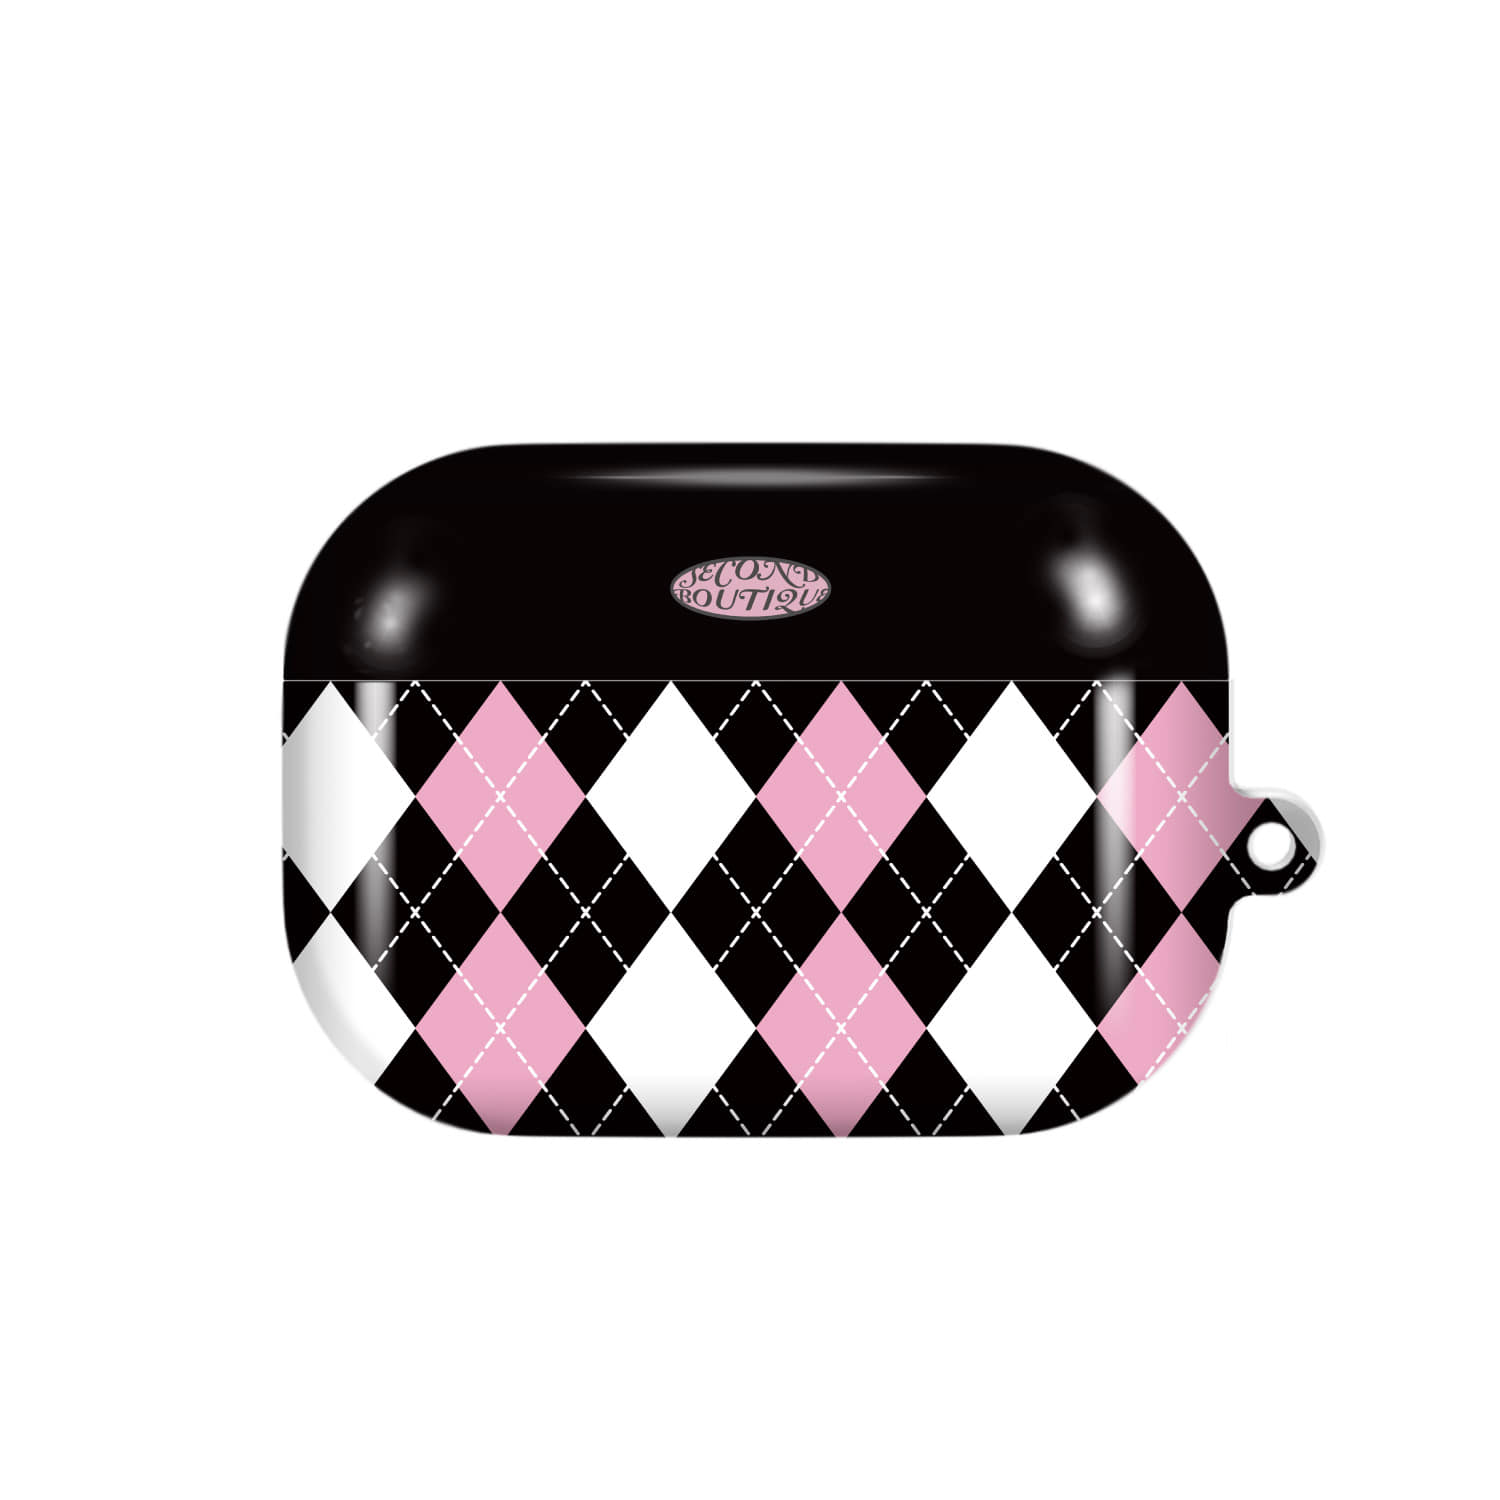 [airpods case] Black pink Argyle pattern airpodscase